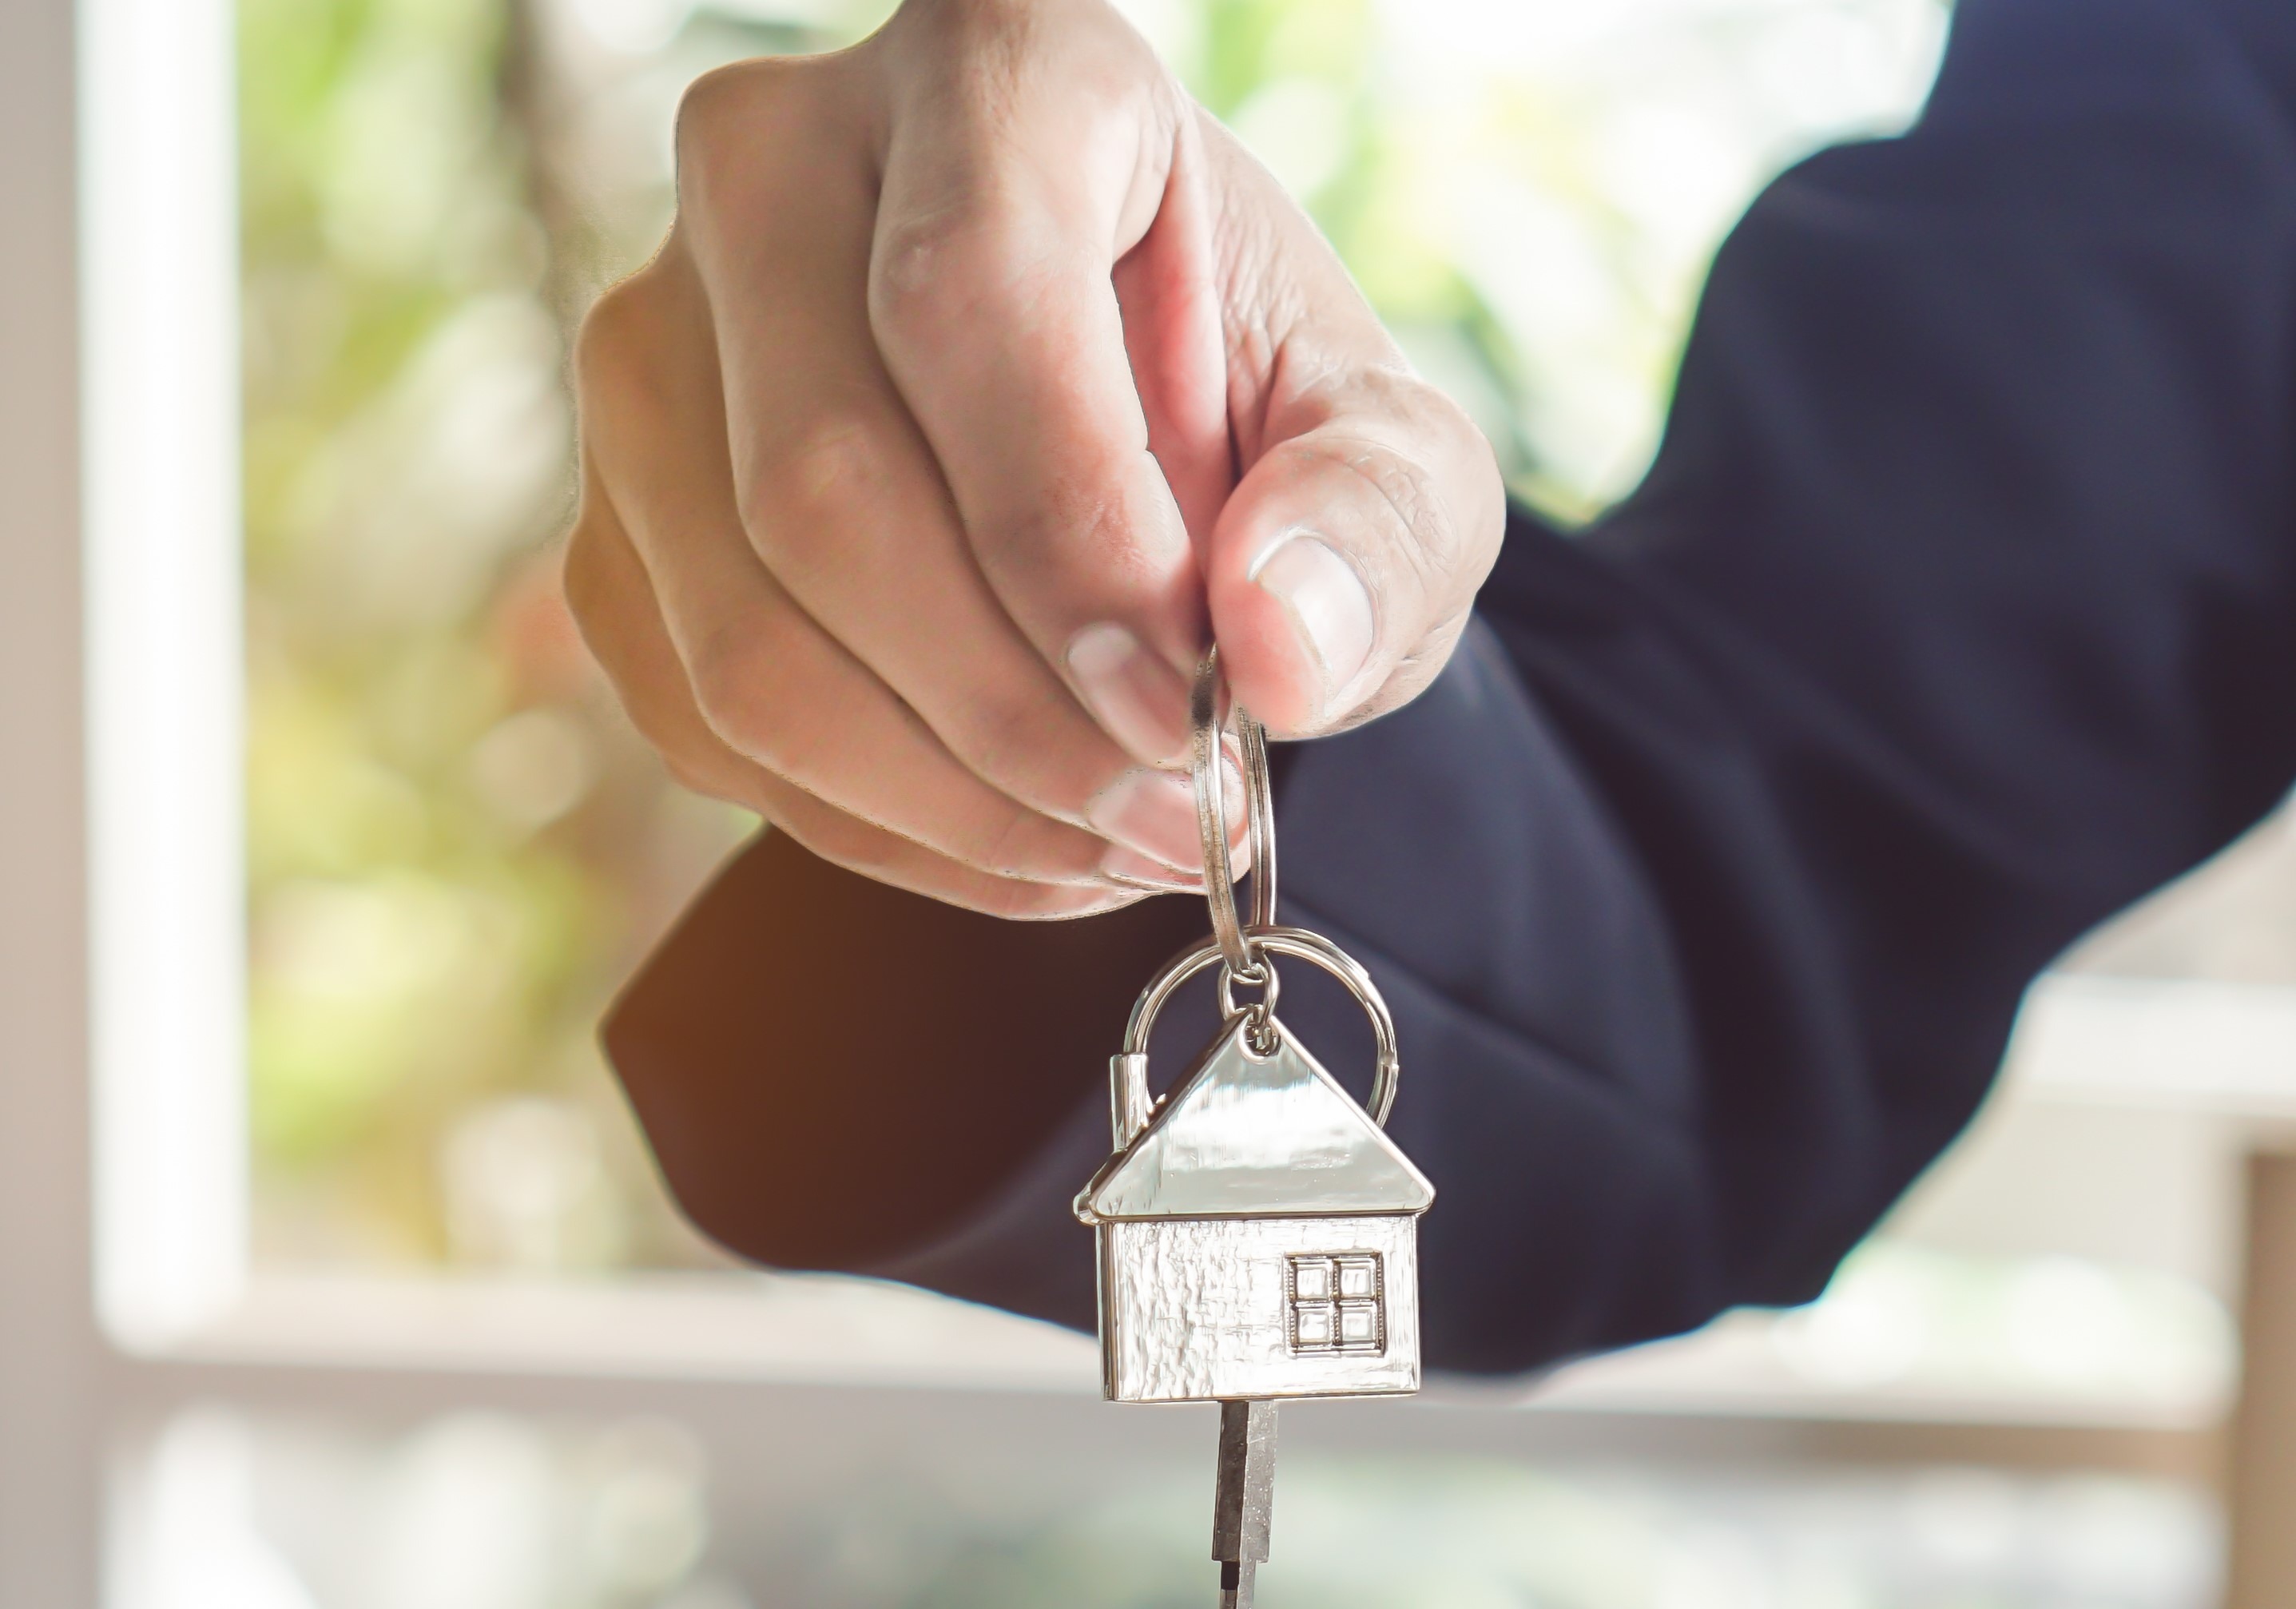 Five Things Landlords Should Know in 2022